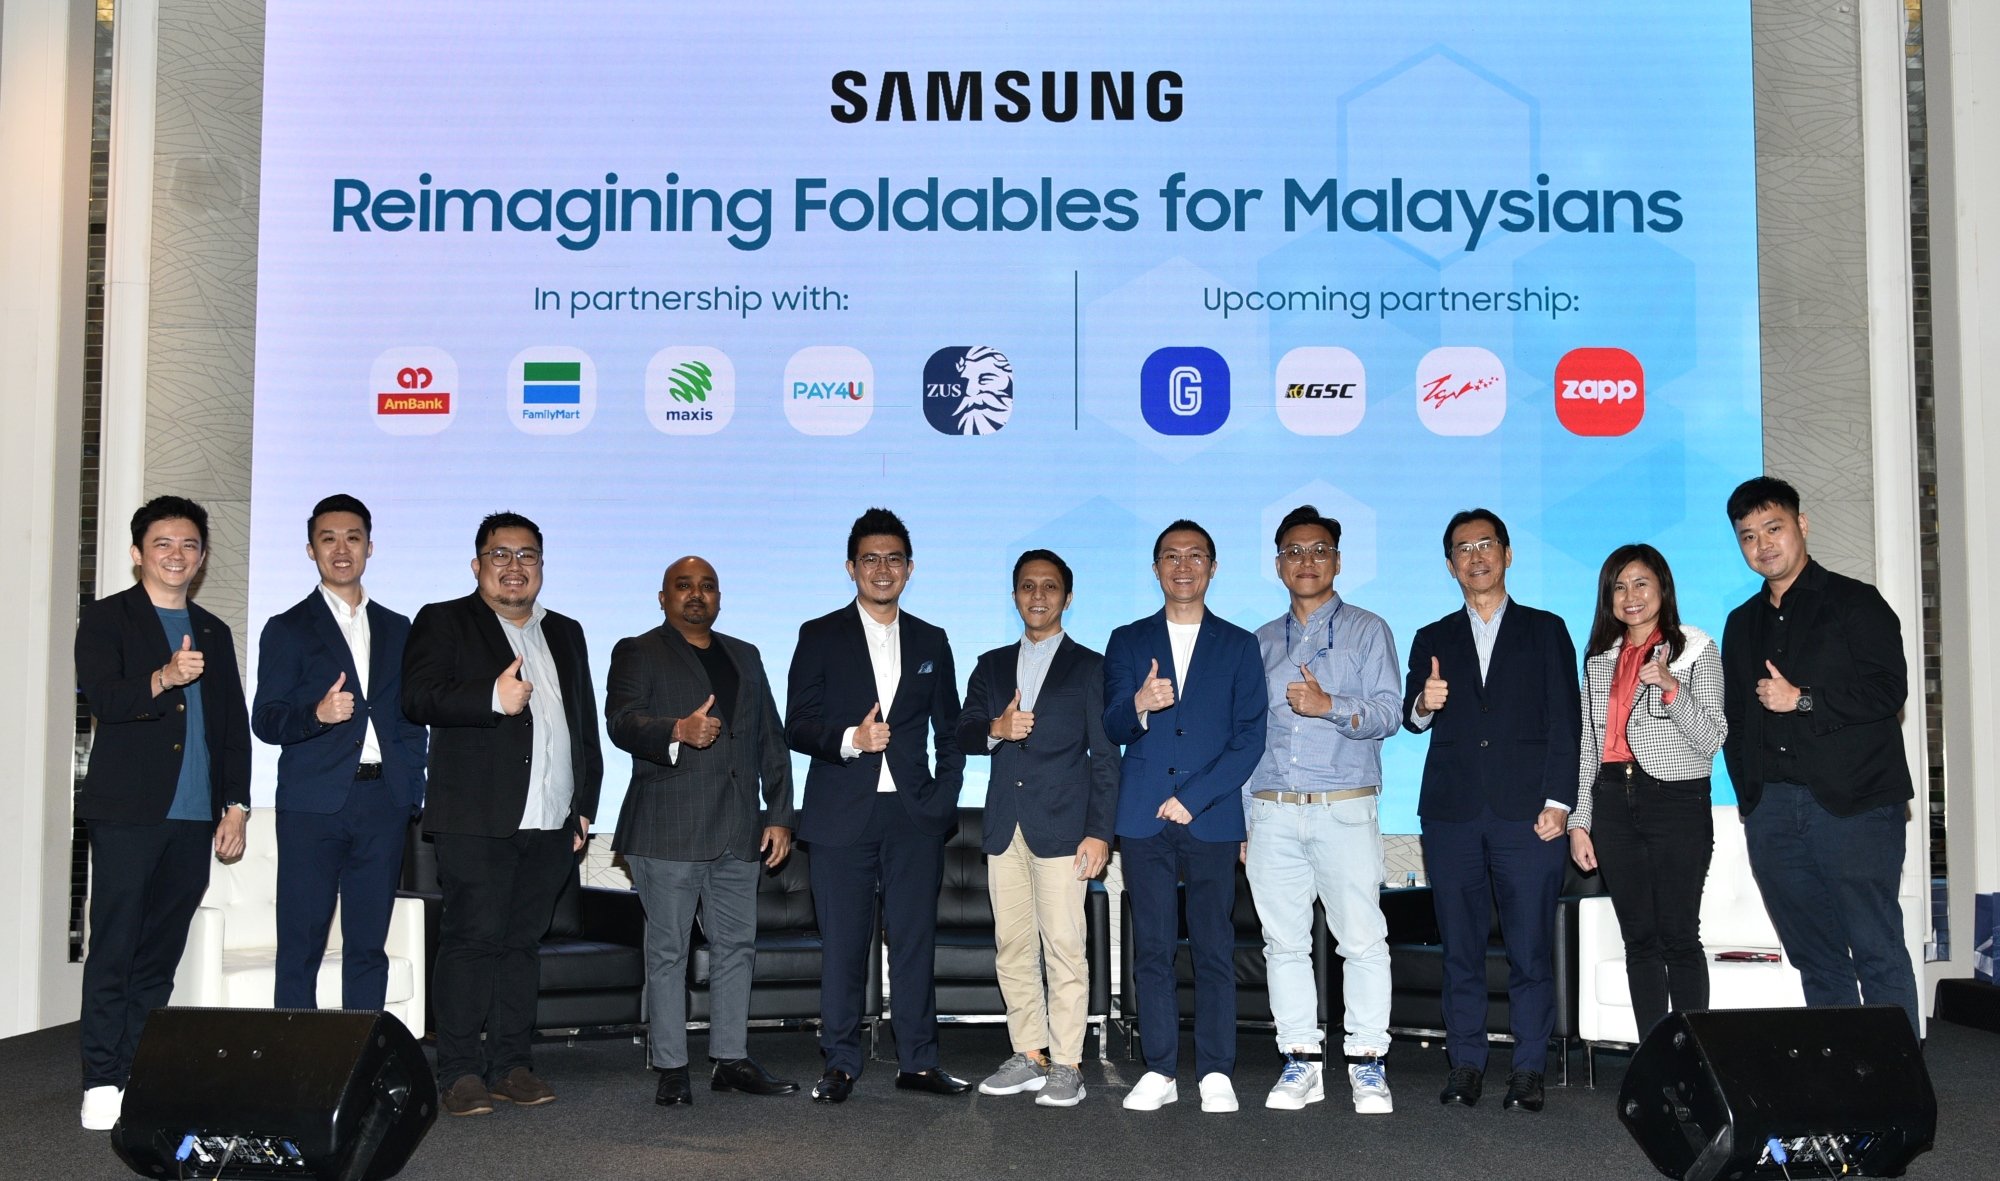 GSC, TGV & more local partners joining Samsung Malaysia's quest to reimagine foldables for Malaysians